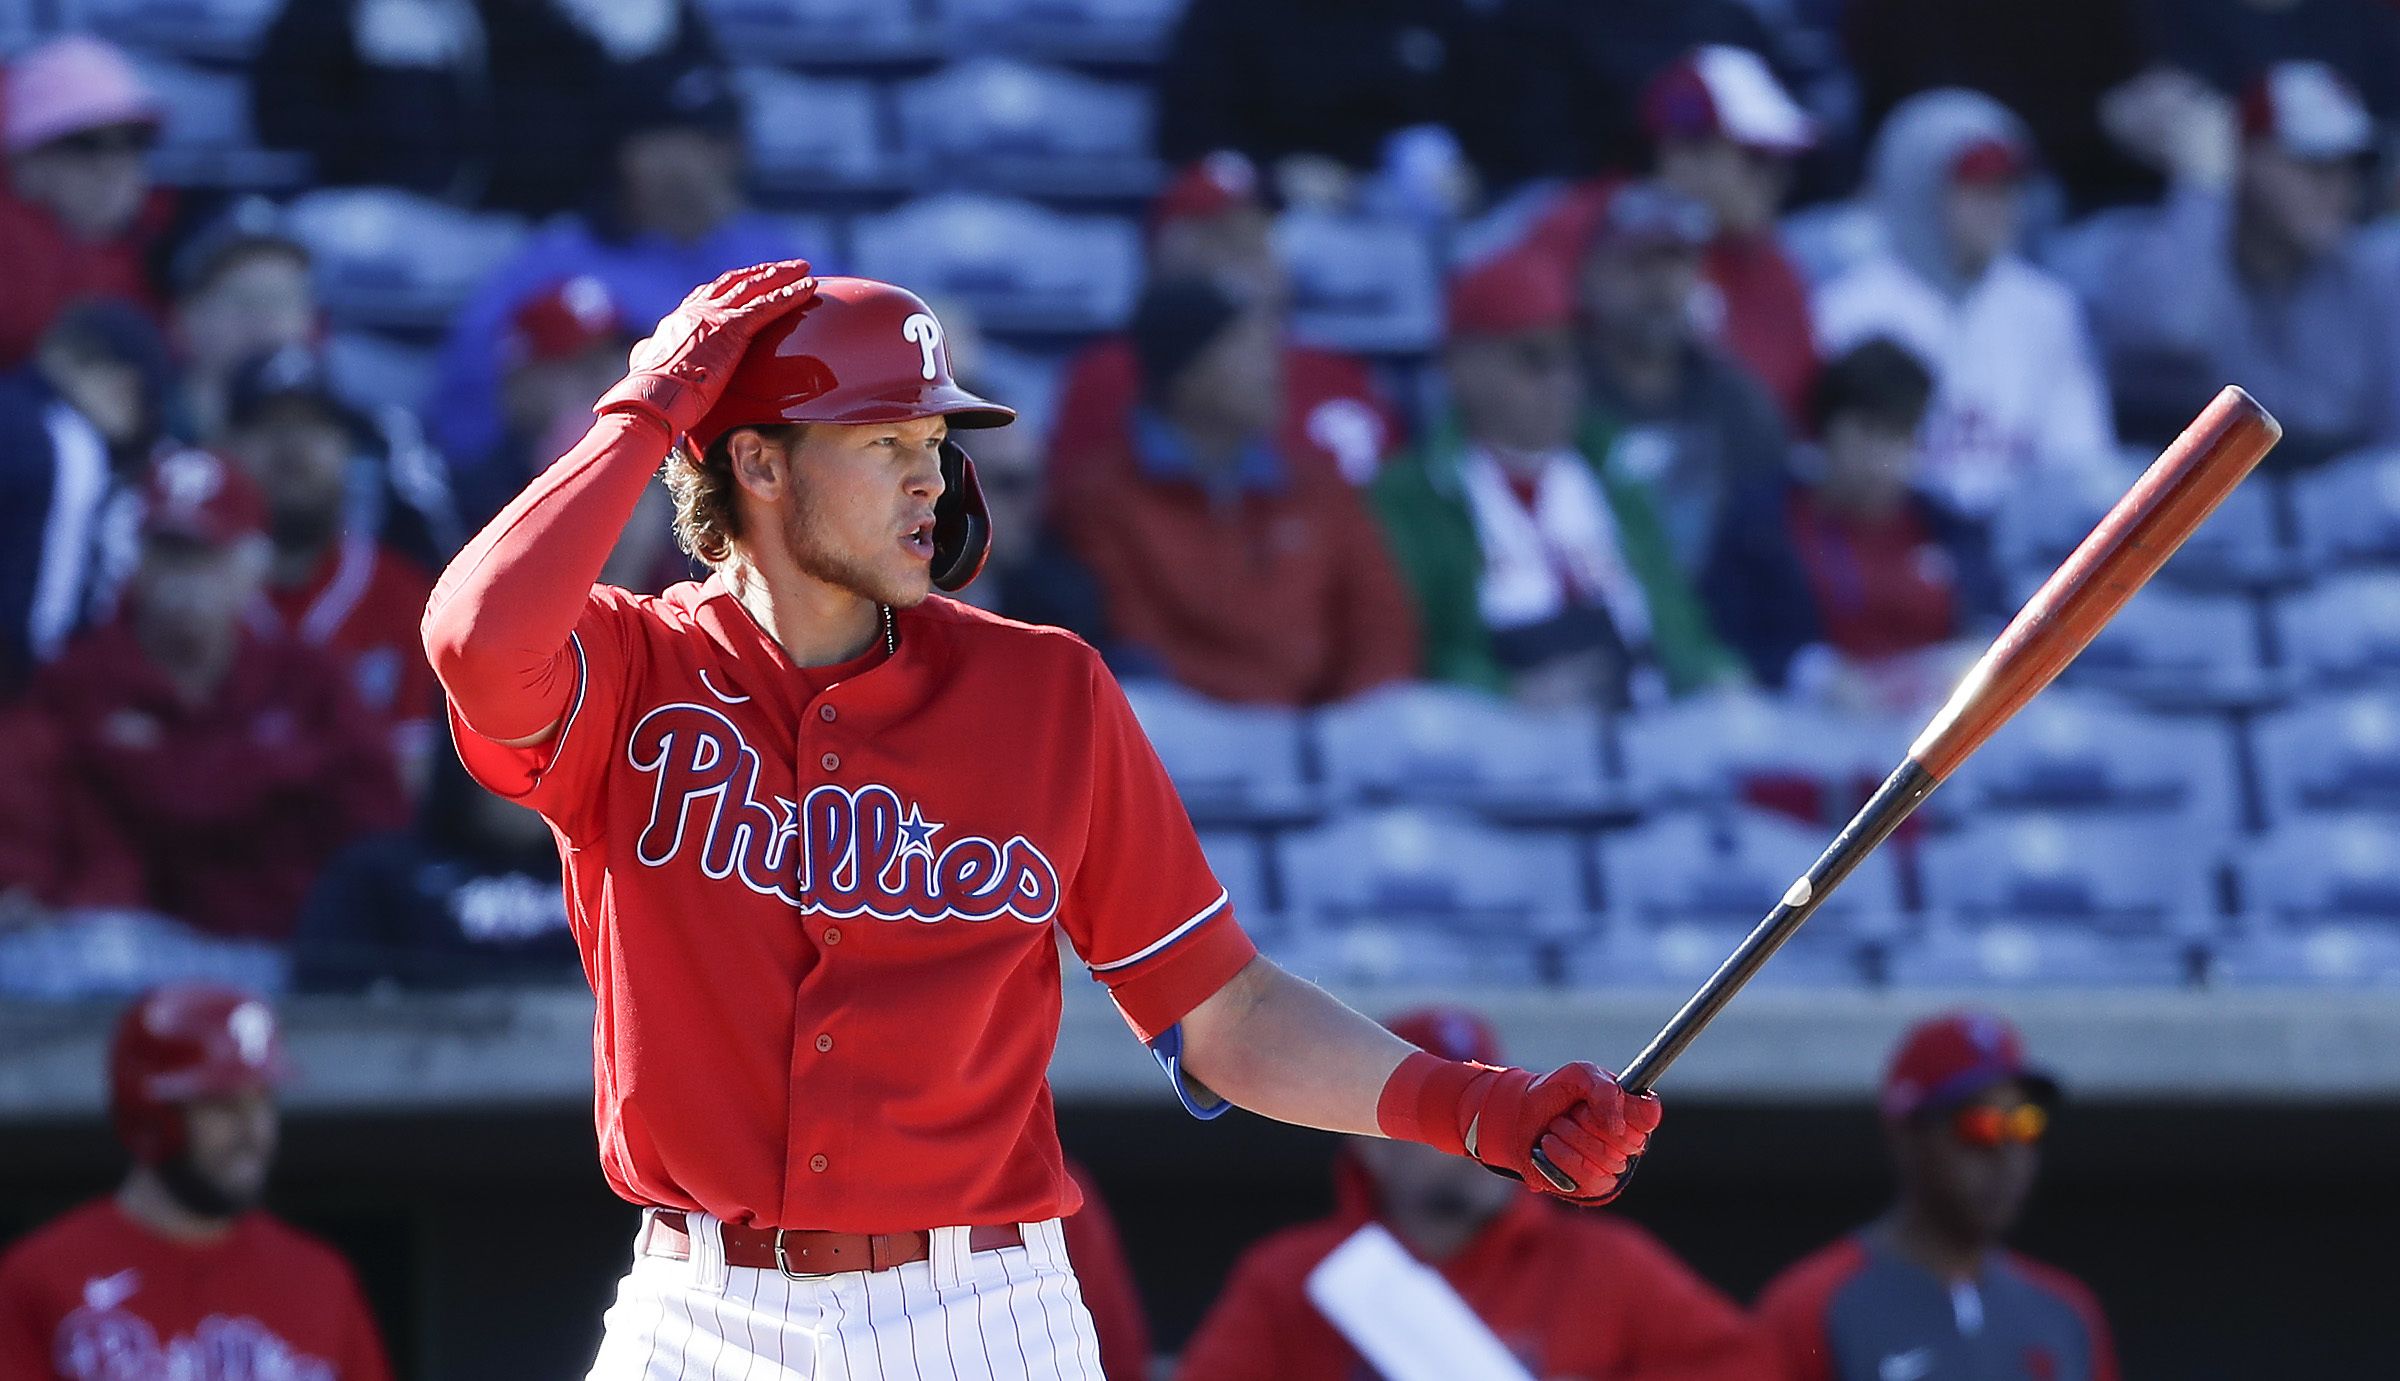 The Phillies are promoting Spencer Howard, but what about Alec Bohm?